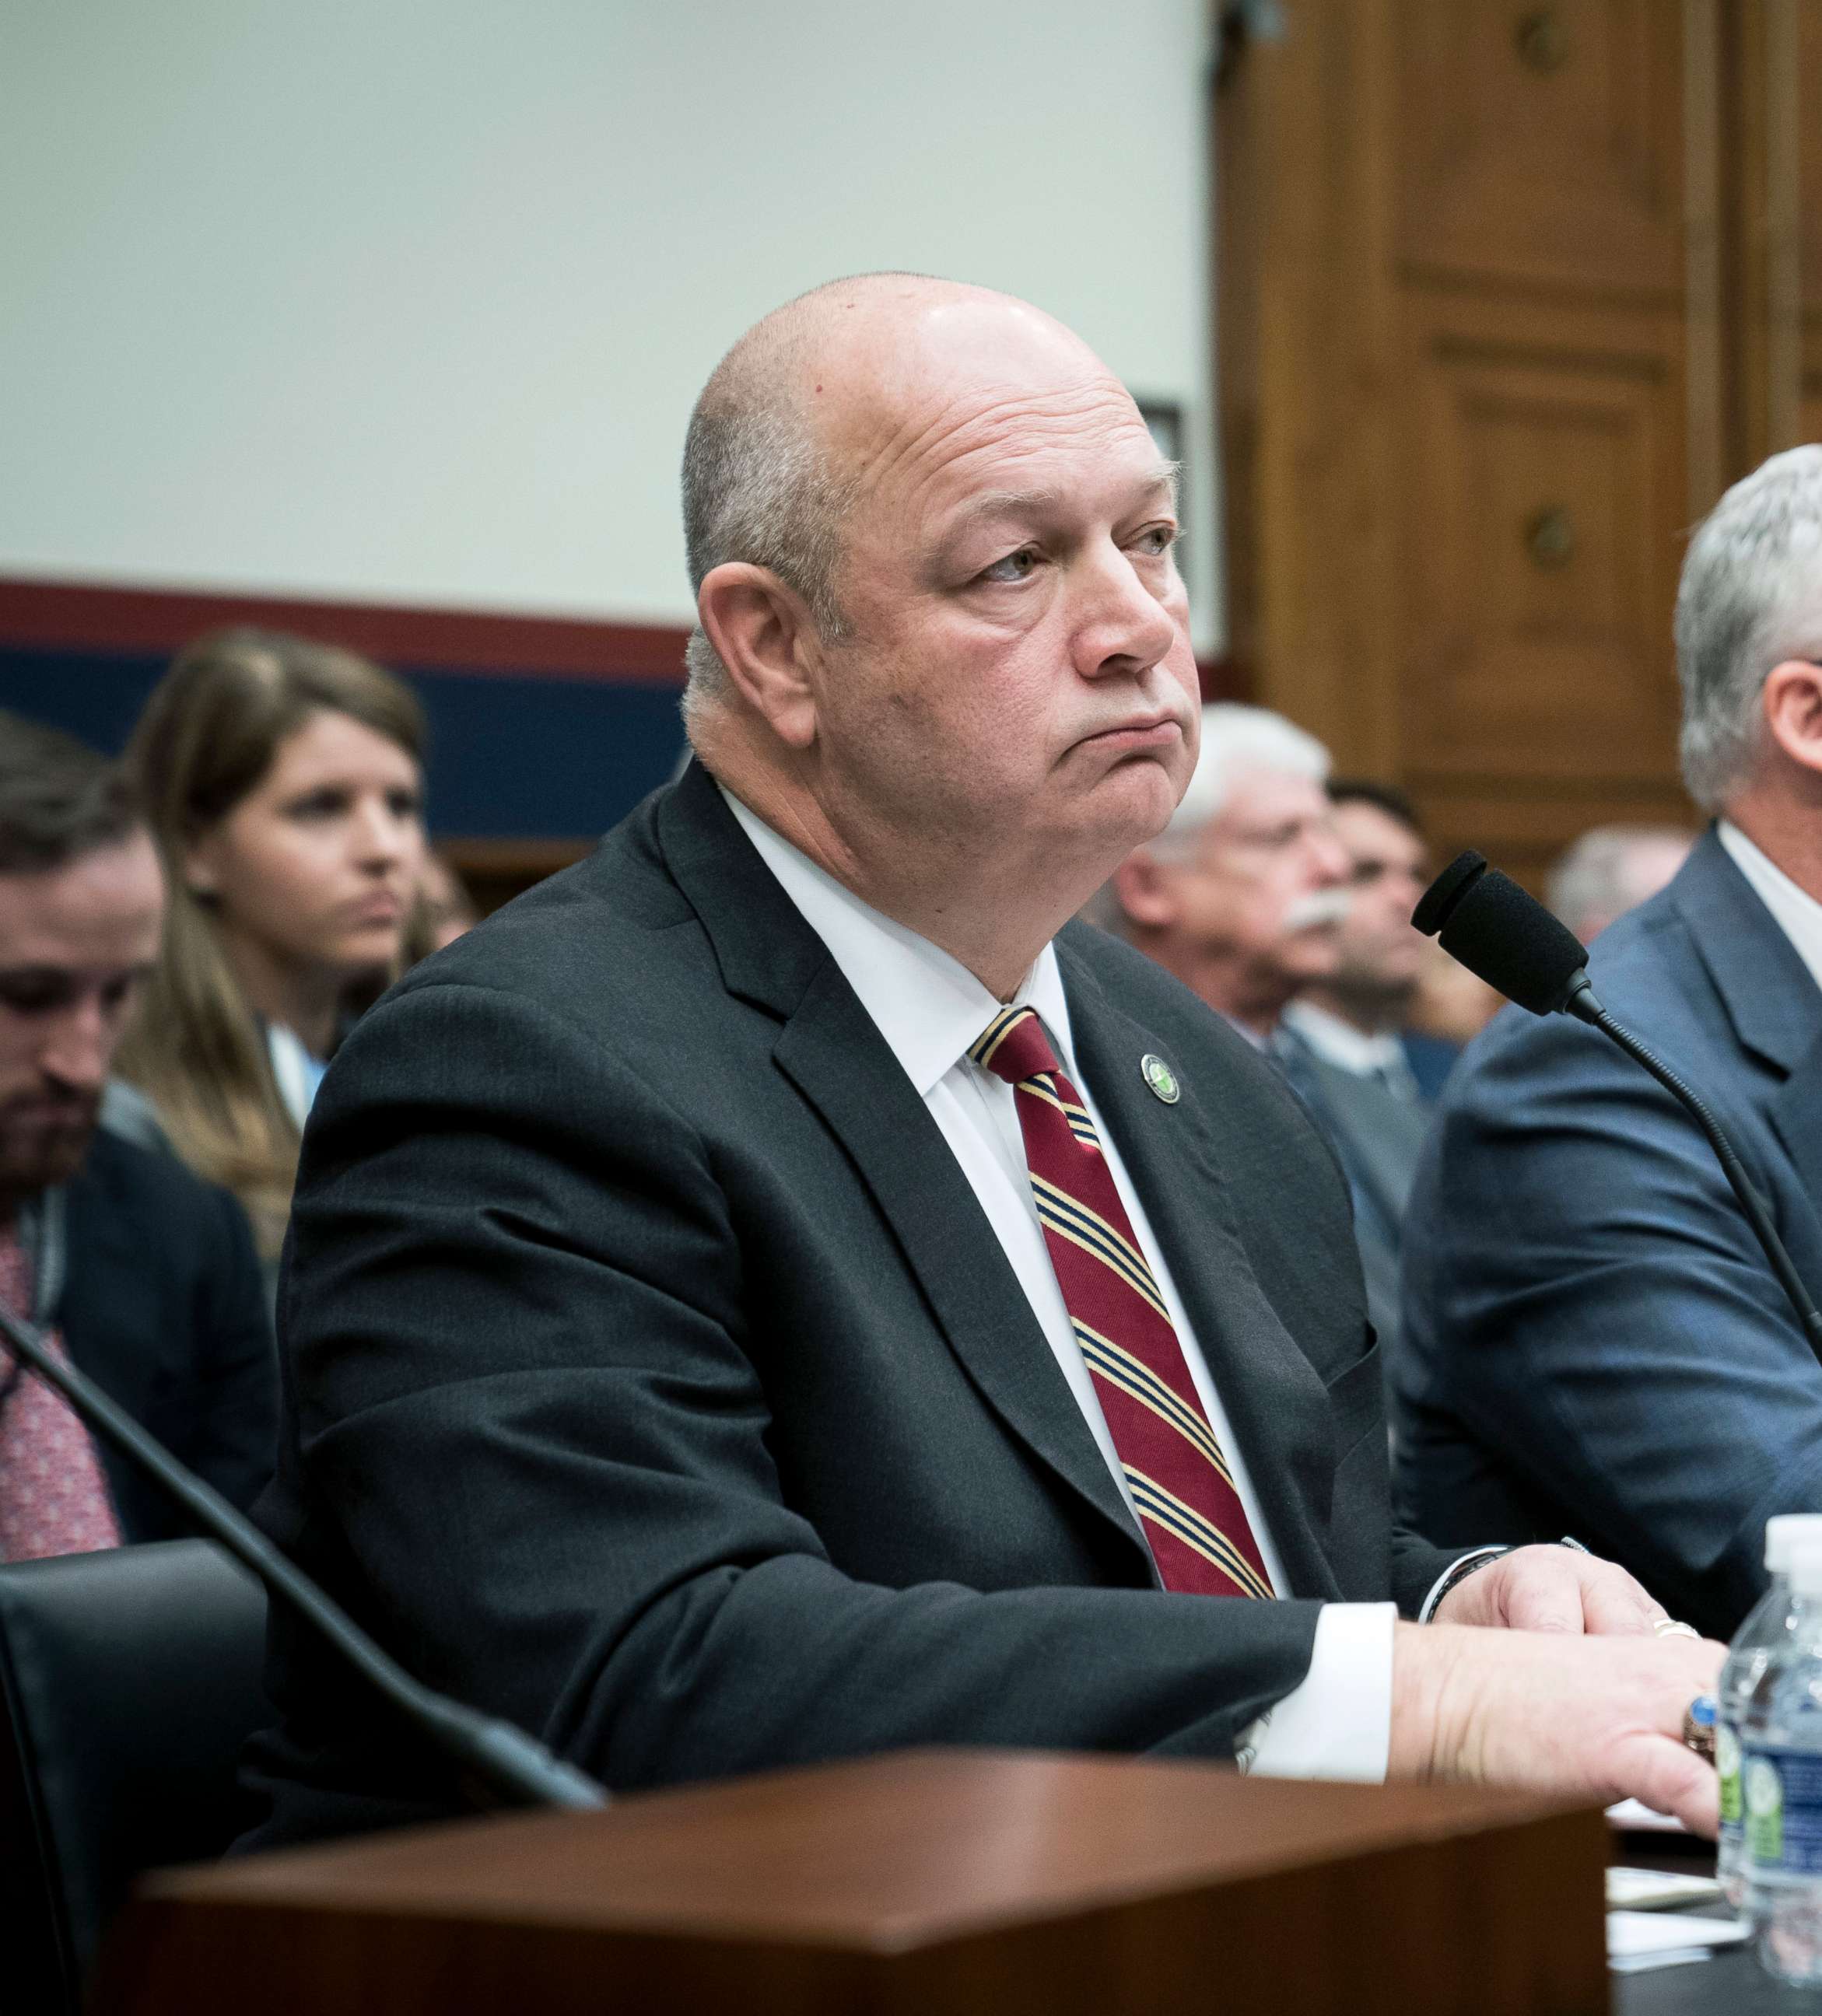 PHOTO: Steve Dickson chief of the Federal Aviation Administration, testifies before the House Committee on Transportation and Infrastructure during a hearing on Dec. 11, 2019.